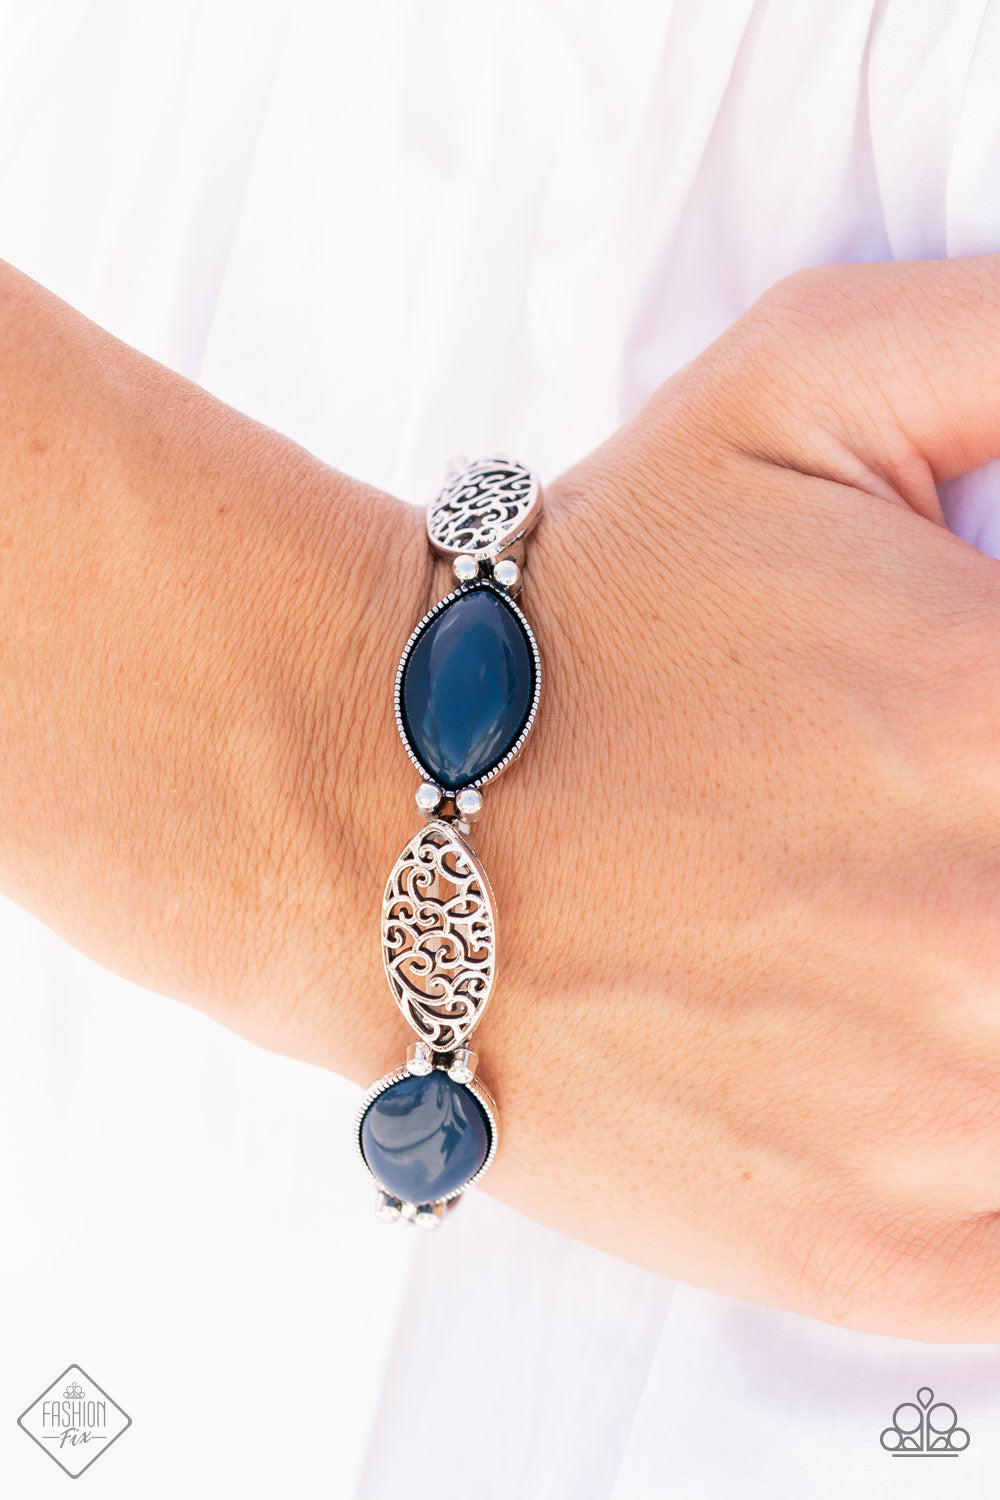 Garden Rendezvous Blue Bracelet - Paparazzi Accessories  Dewy Navy Blue opals set in daintily studded silver frames mingle with frames of swirling silver filigree as they alternate along stretchy bands for a whimsically wild fashion around the wrist.  All Paparazzi Accessories are lead free and nickel free!  Sold as one individual bracelet.